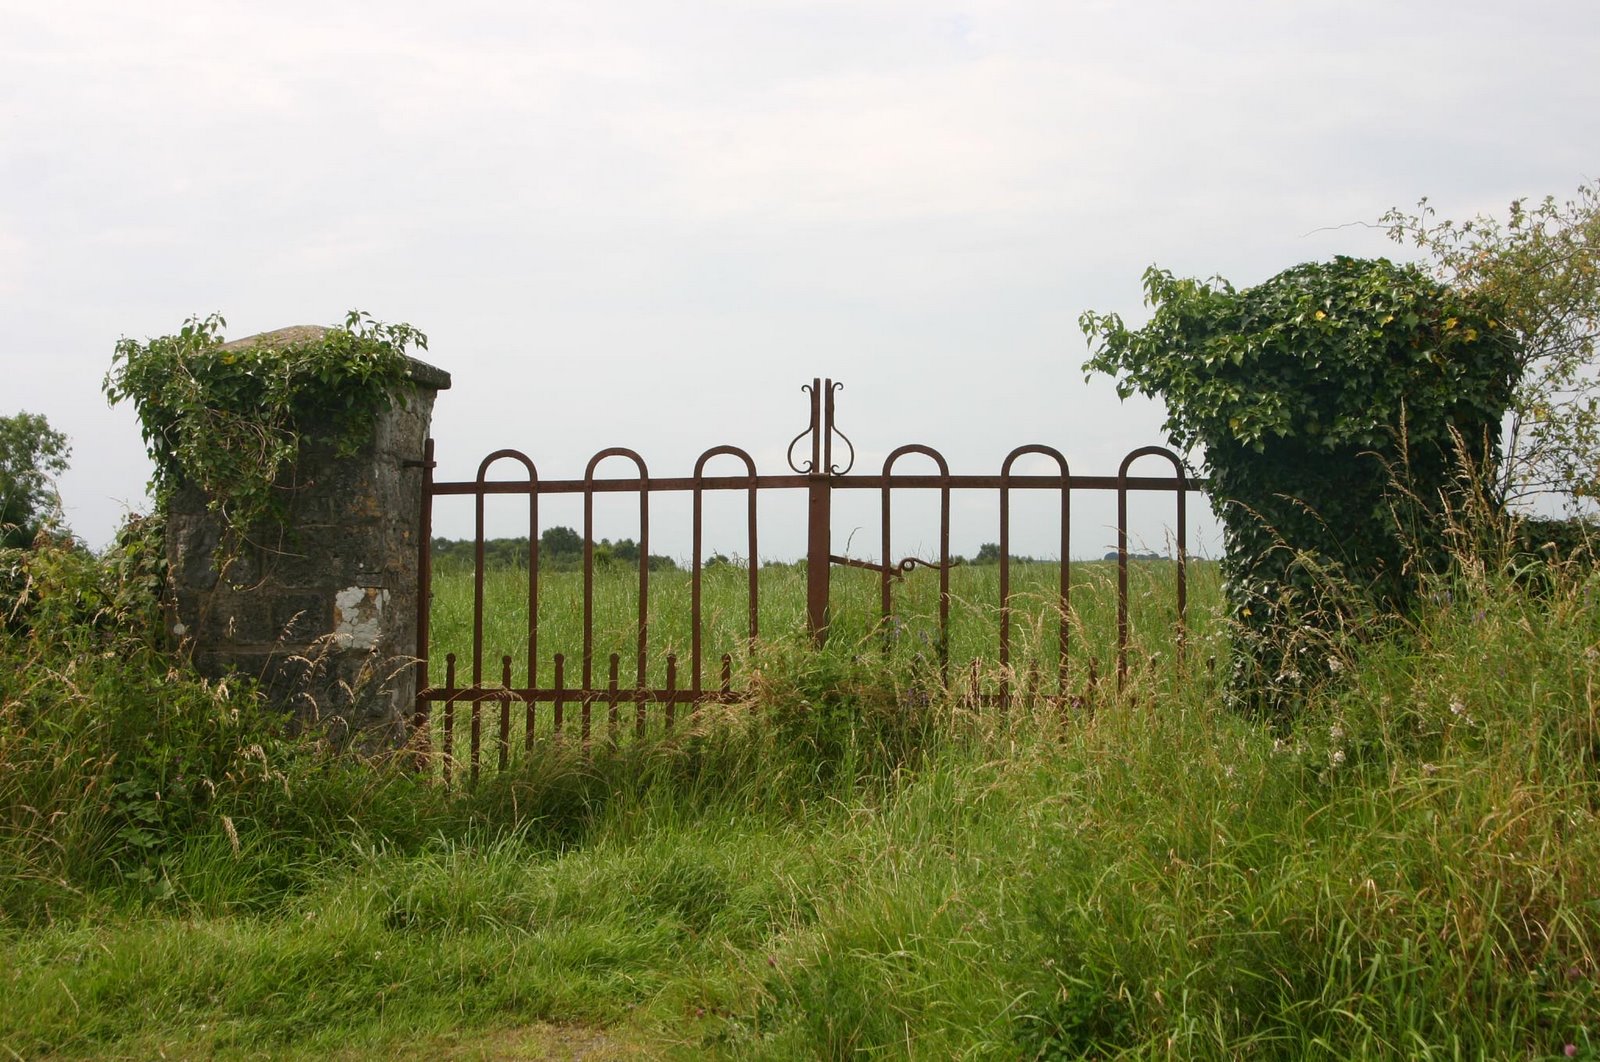 [Gate+near+O'Callaghan's+Mill+and+weeds.jpg]